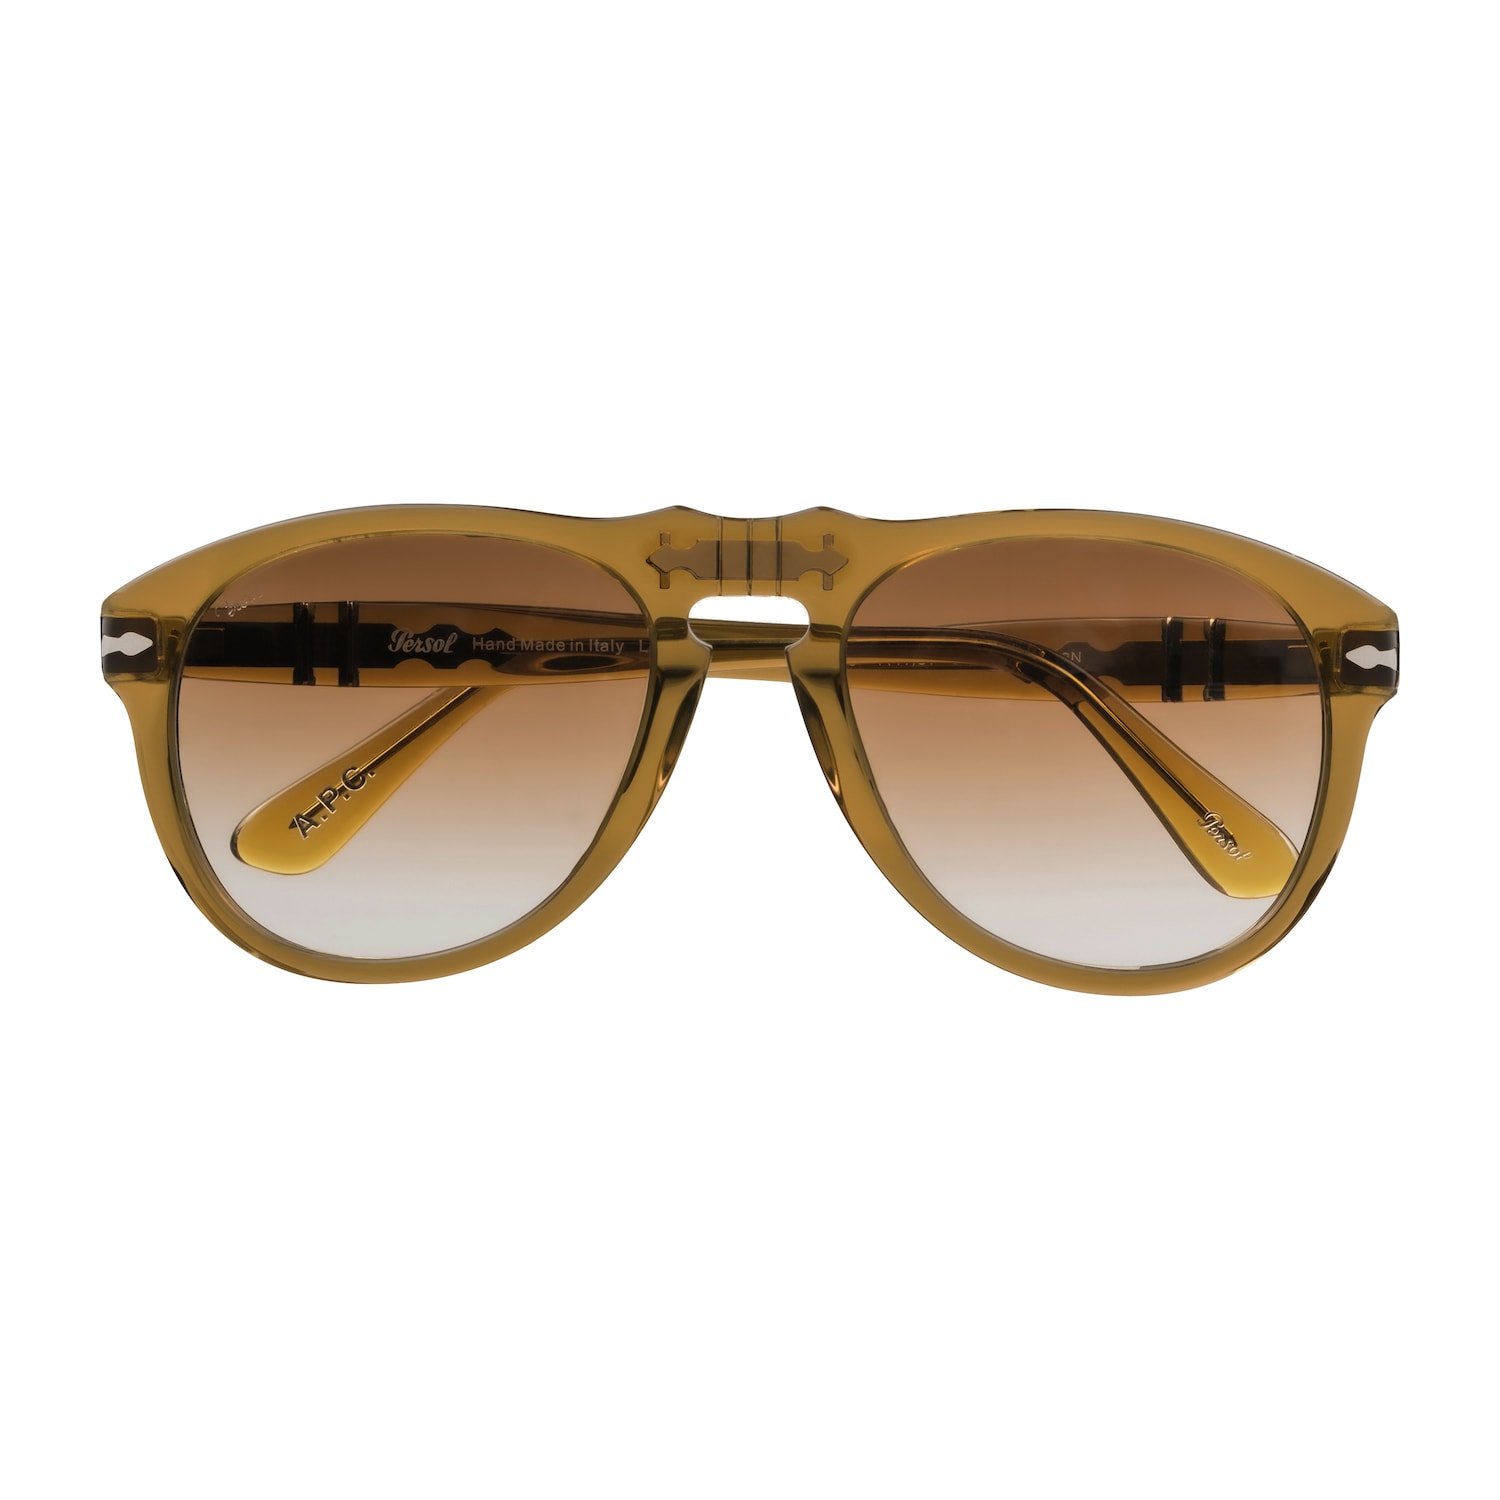 Complex Best Style Releases A.P.C. x Persol sunglasses